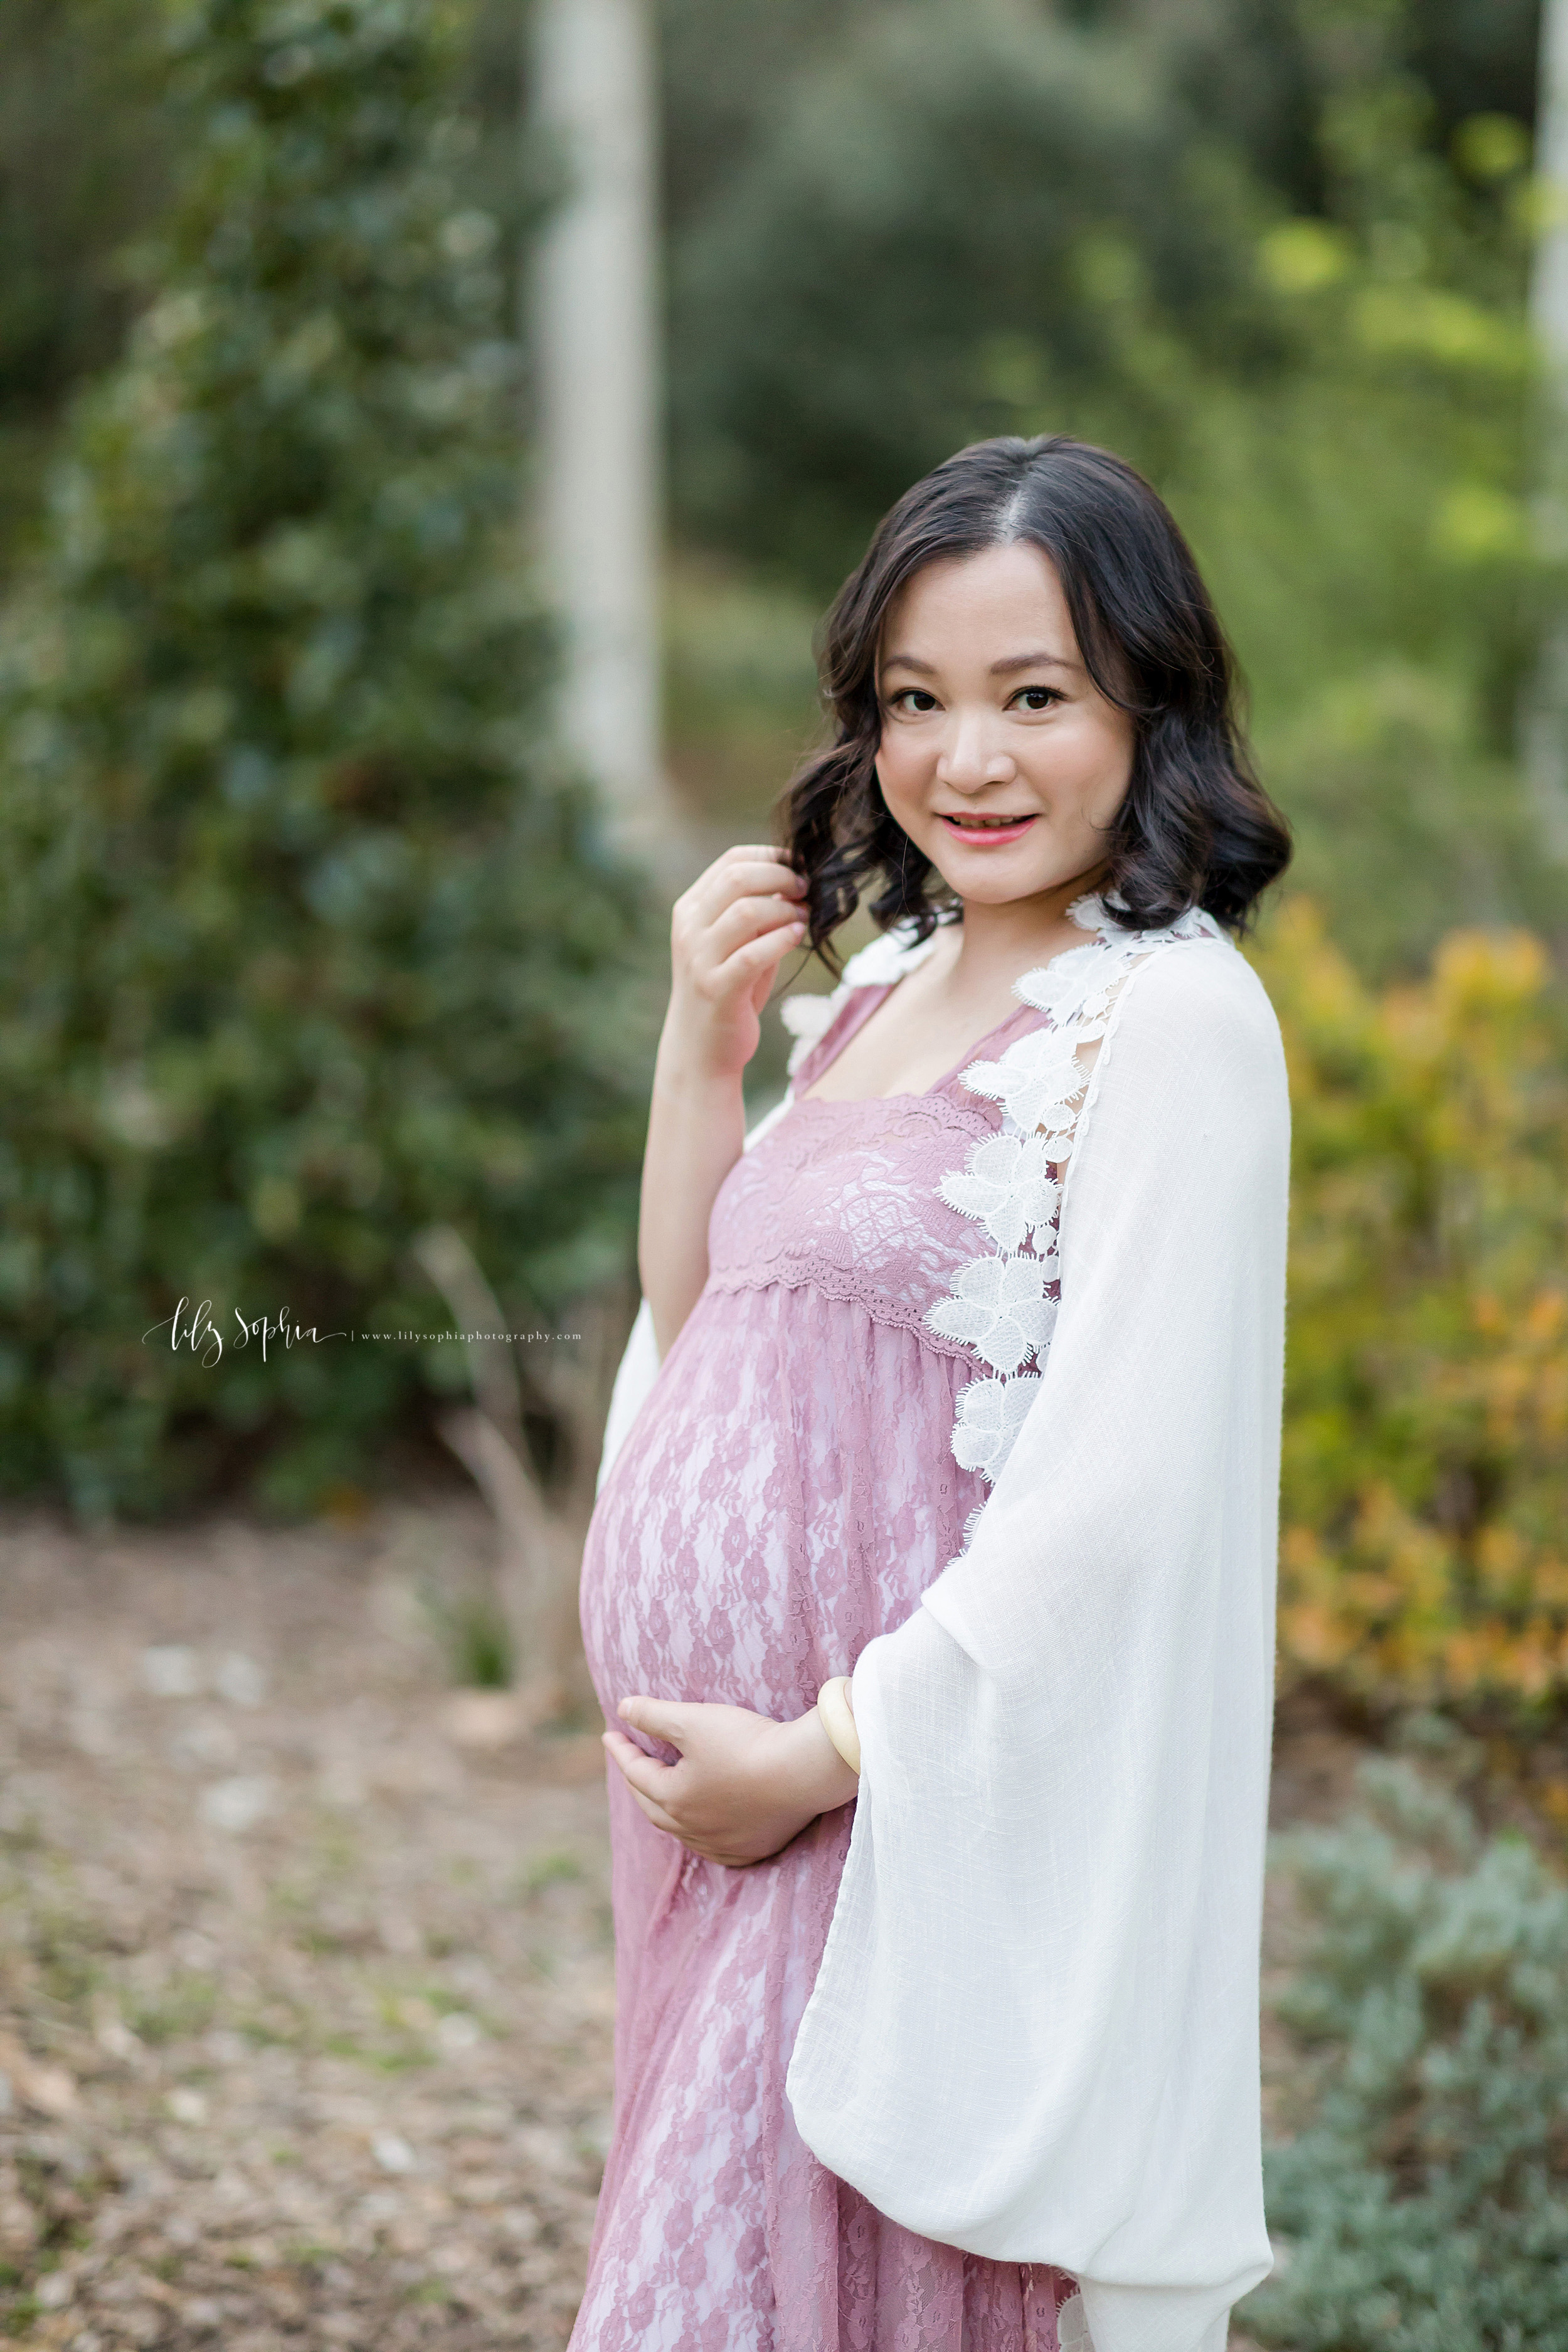  Pregnant woman poses in an Atlanta garden for a photo. She is wearing a rose colored lace full-length sundress and a white shawl with a flowered edge as she stands in the garden. She is playing in her hair with her right hand and holding her belly w